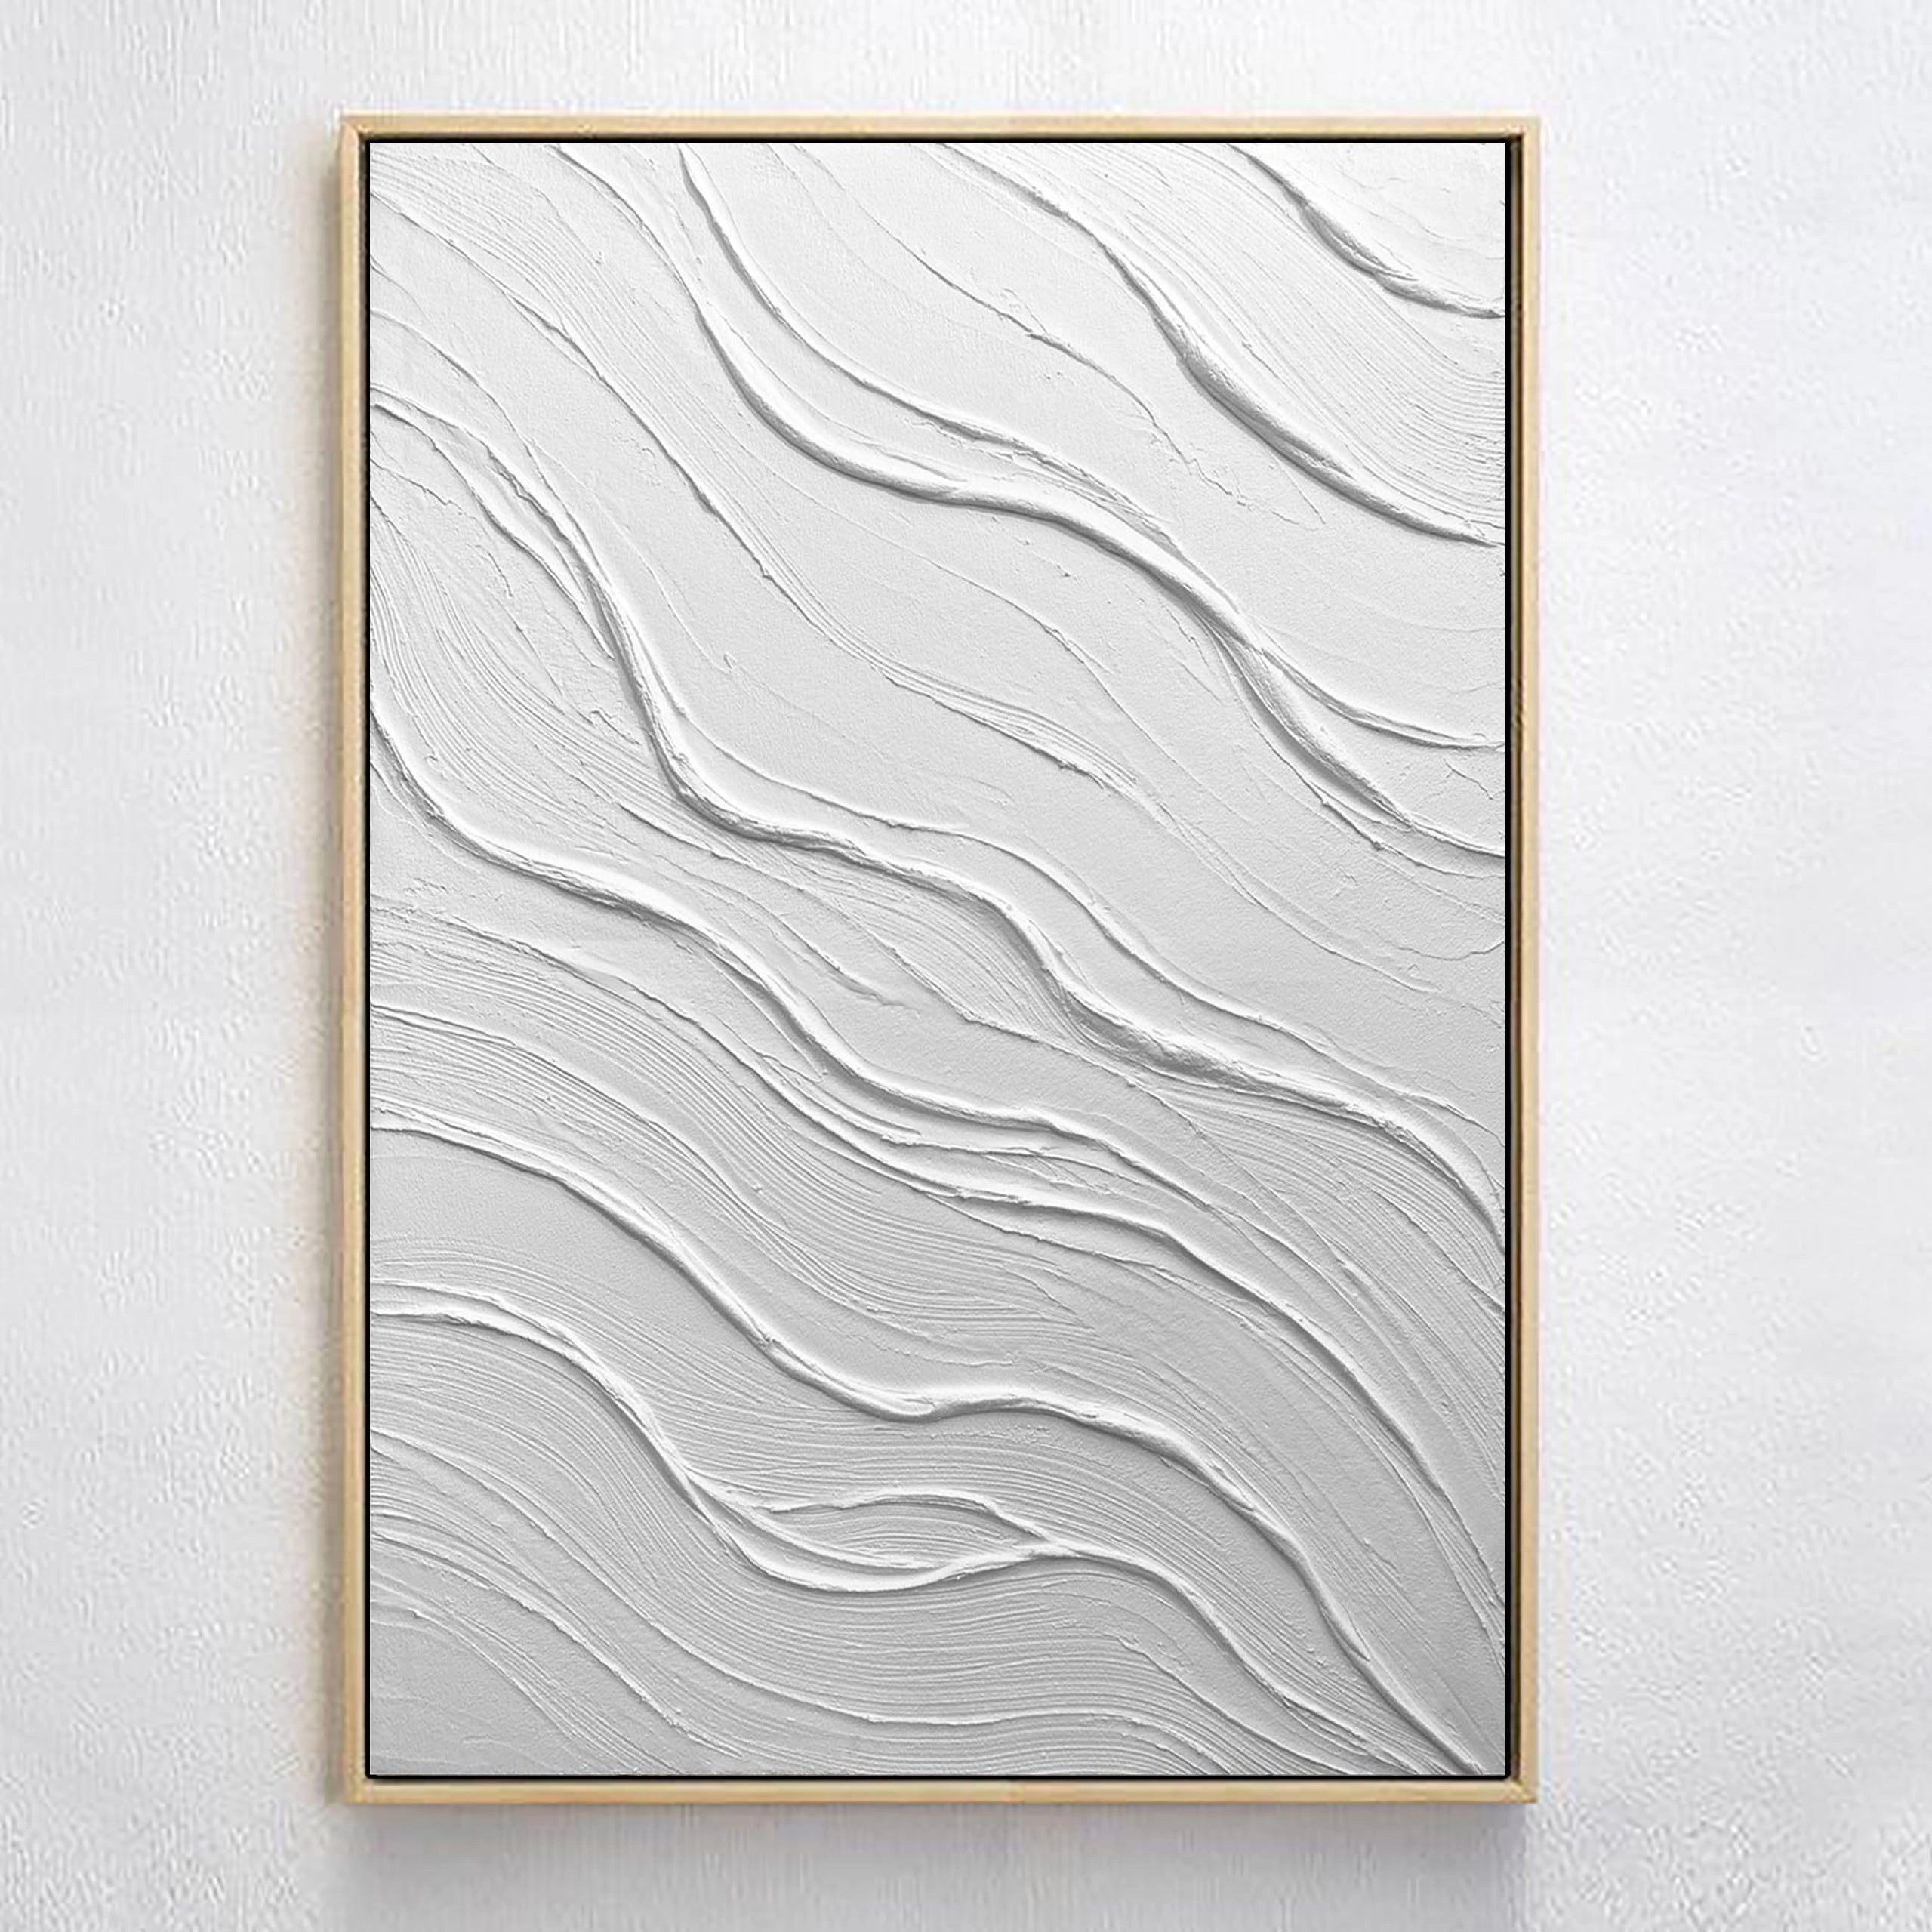 Large Size White Textured Wave Plaster Art Painting Wall Artwork for Room Deco